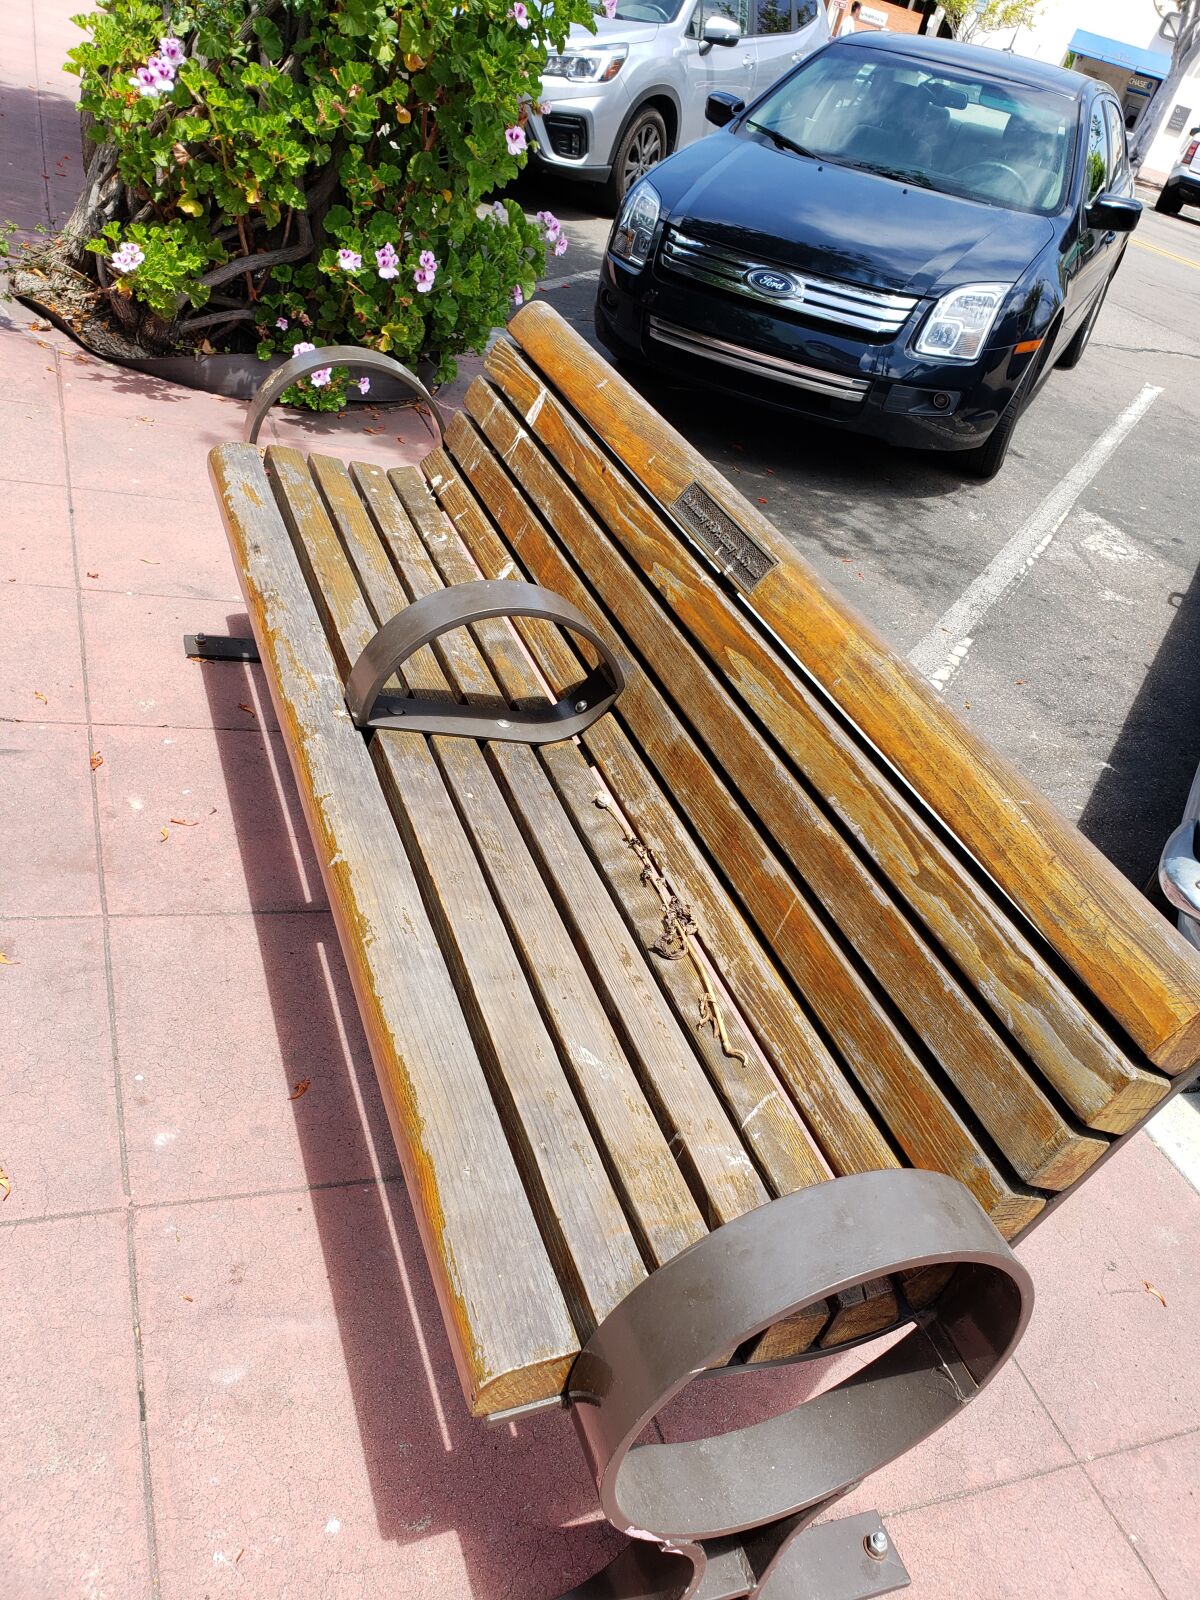 Worn wood benches on La Jolla's main streets will be refurbished in coming weeks.